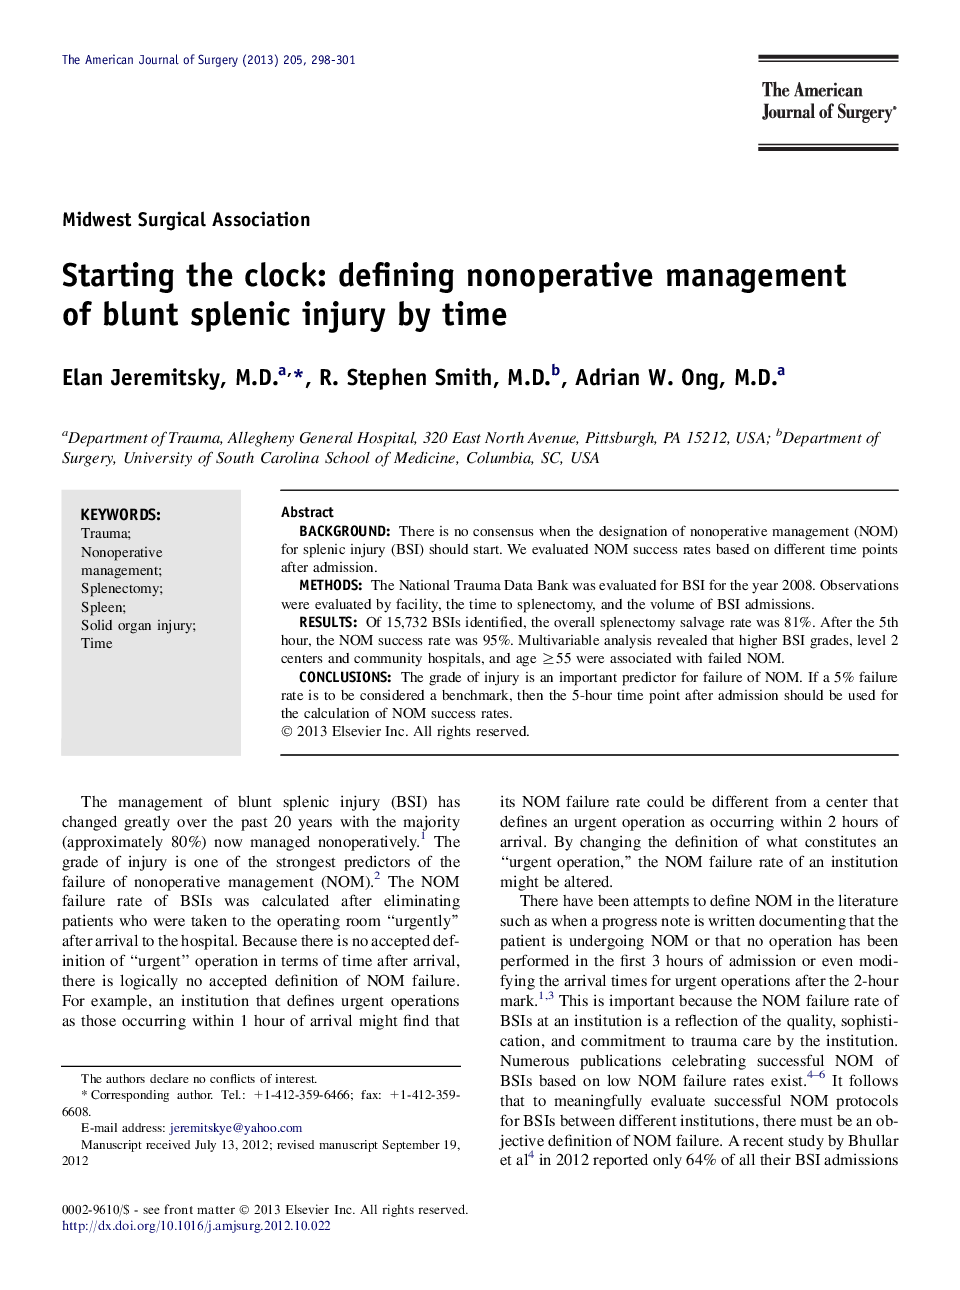 Starting the clock: defining nonoperative management of blunt splenic injury by time 